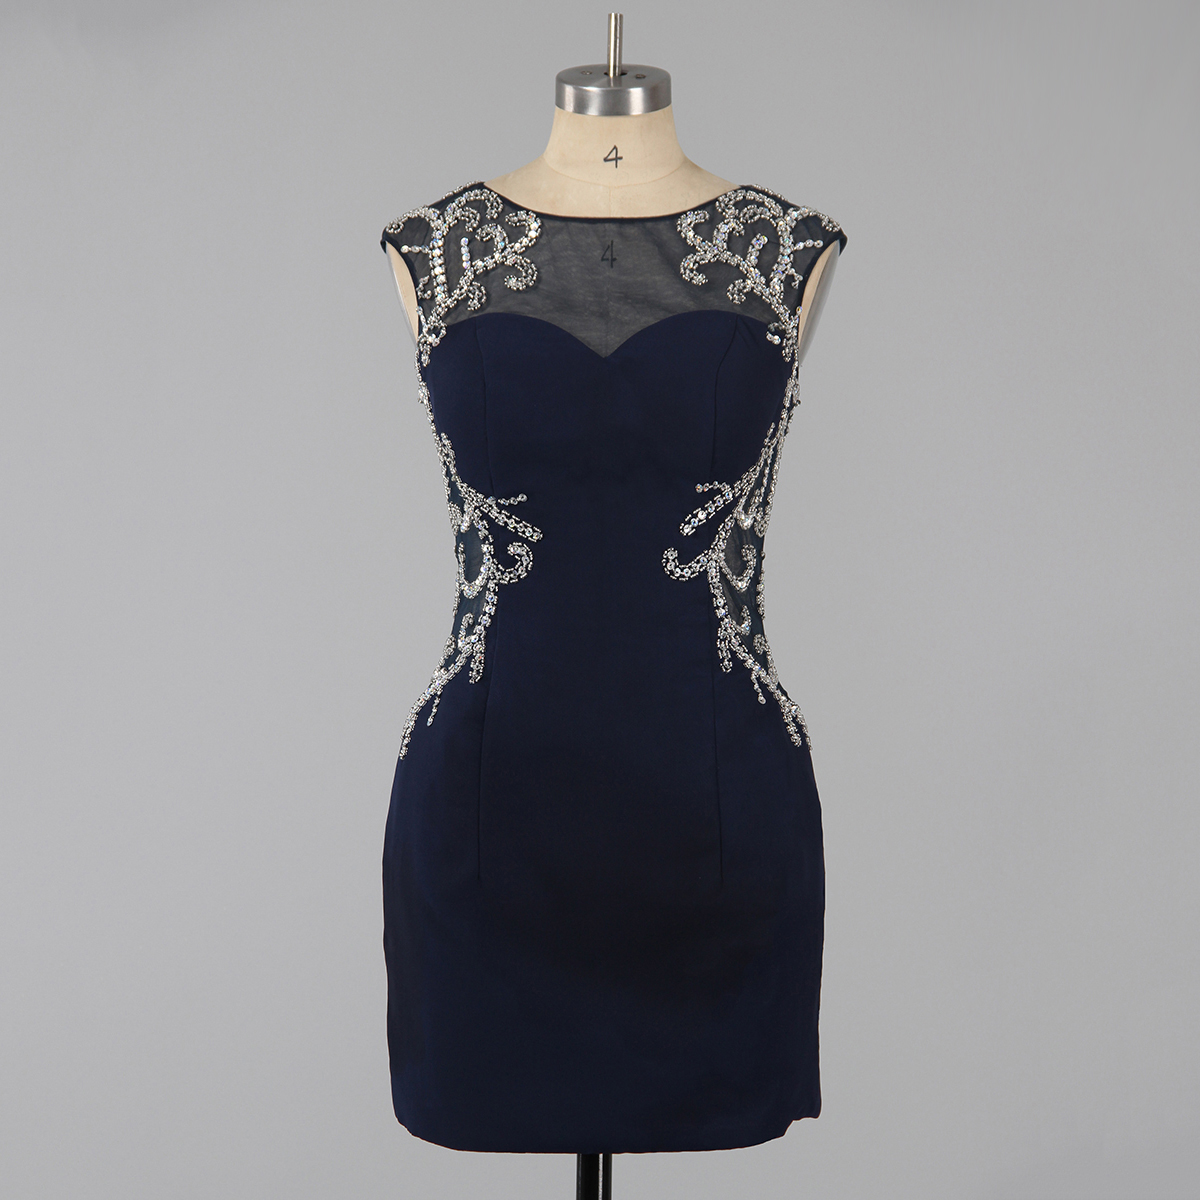 Dark Navy Column Illusion Neck Homecoming Dresses, Sexy Open Back Homecoming Dresses, Silk-like Satin Homecoming Dress With Sparkle Beads